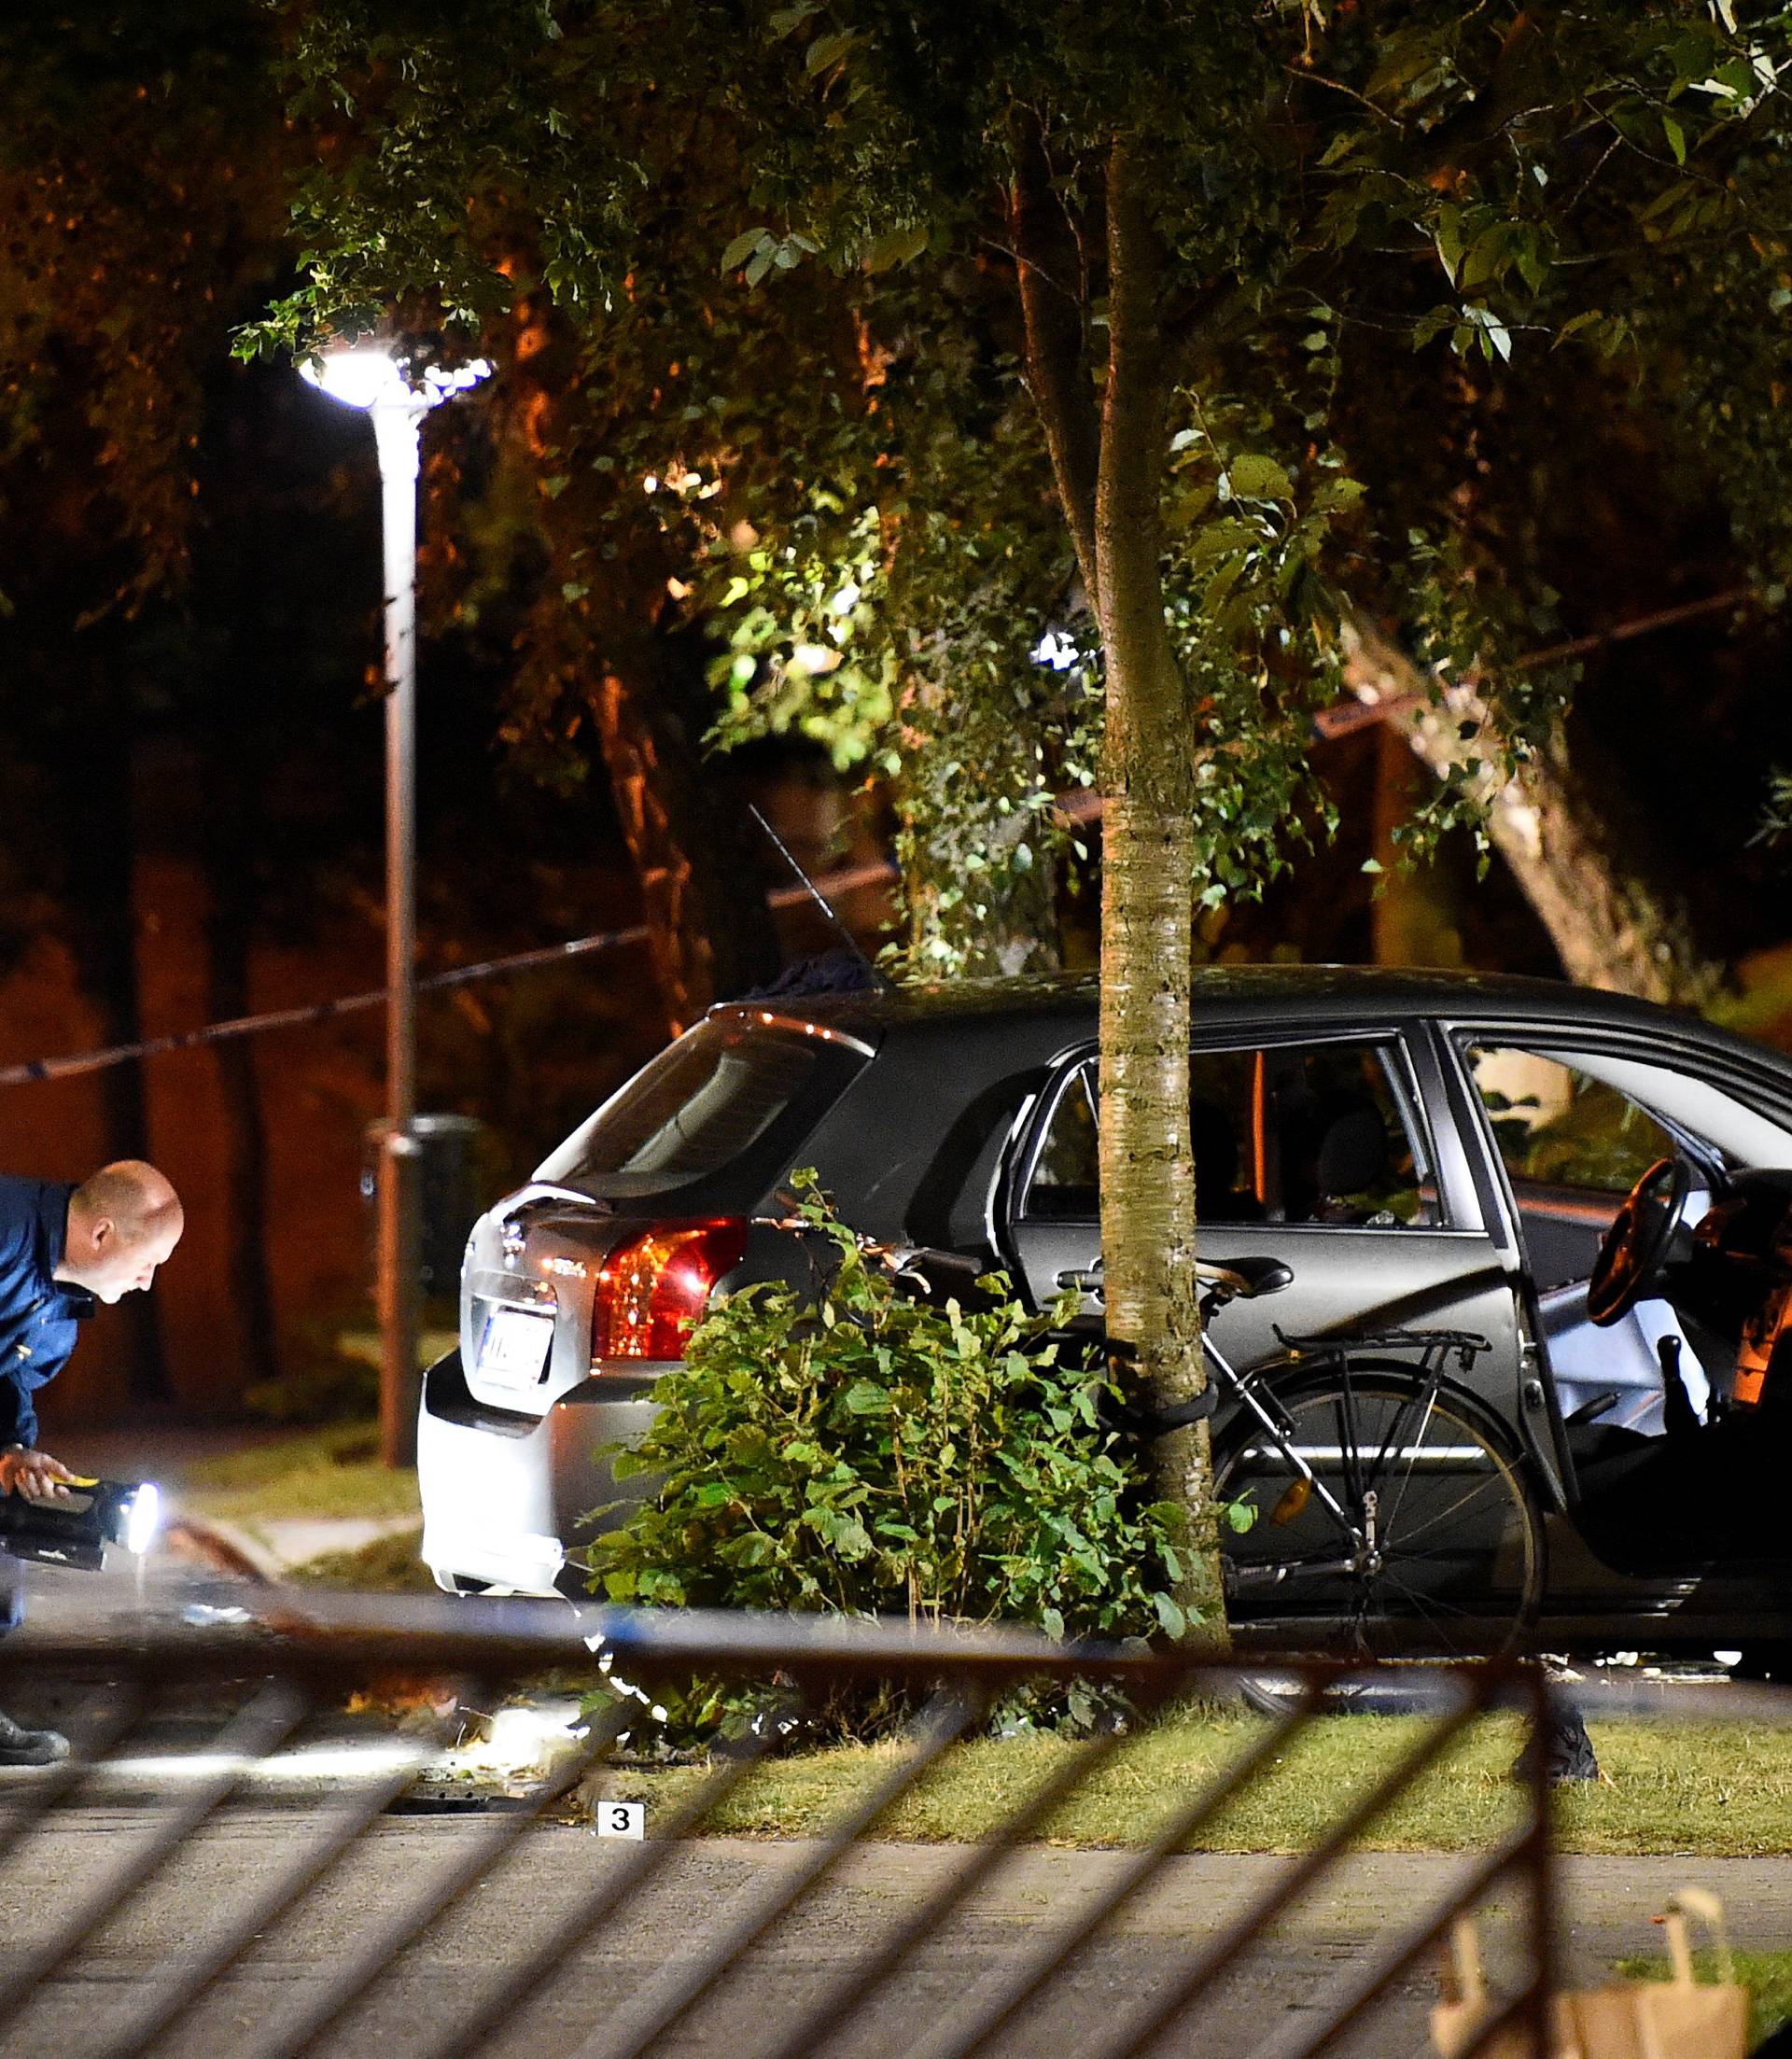 Police technicians examine the car which people who were injured were traveling in, after a shooting in southern Malmo